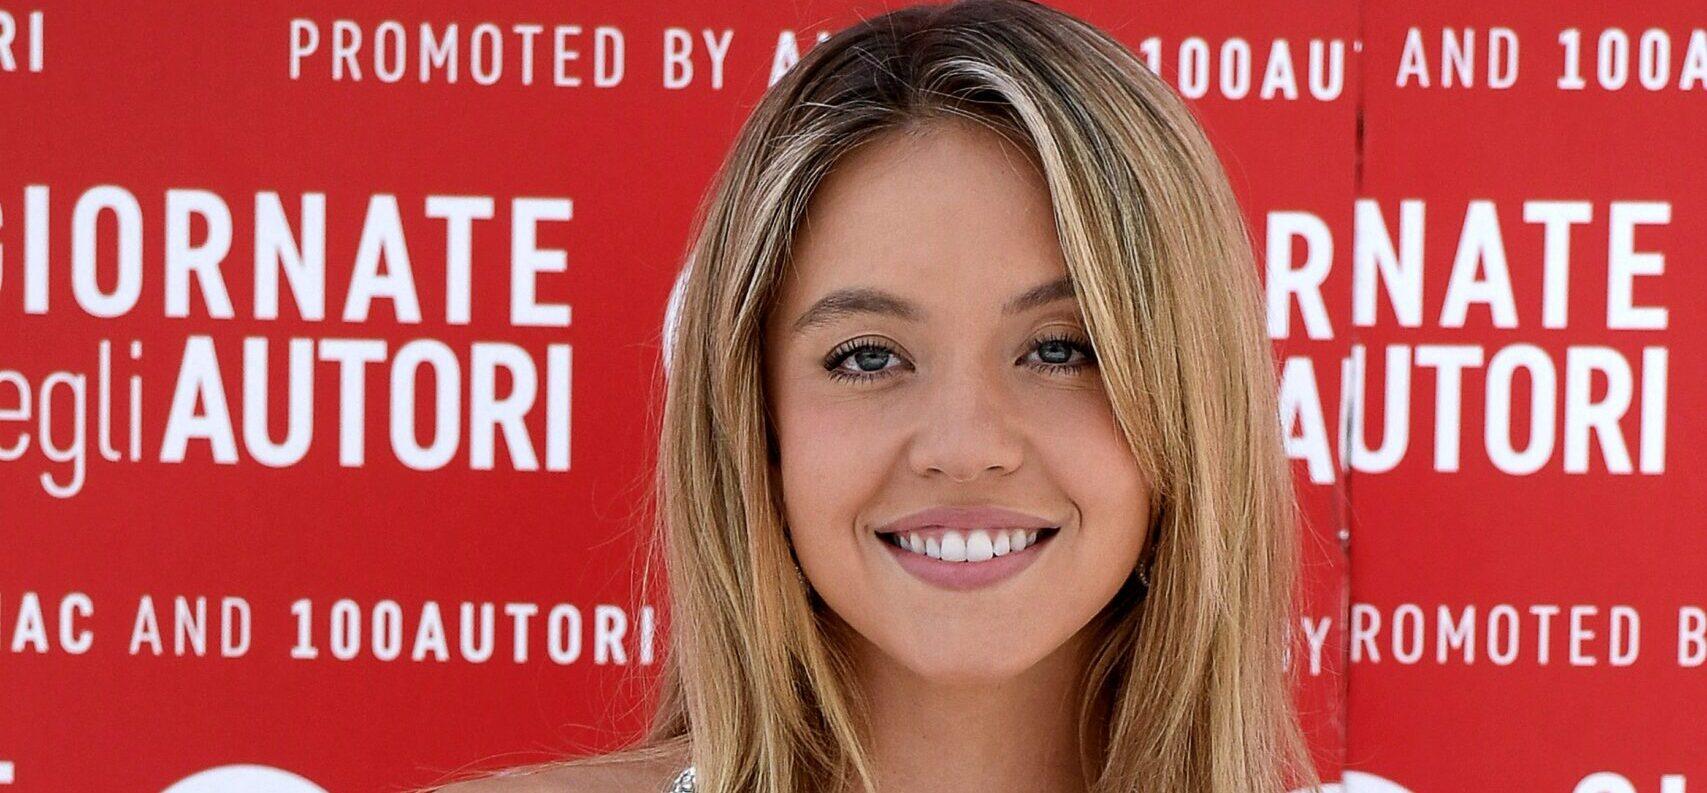 Sydney Sweeney Poses With Santa Claus In New Holiday Pictures